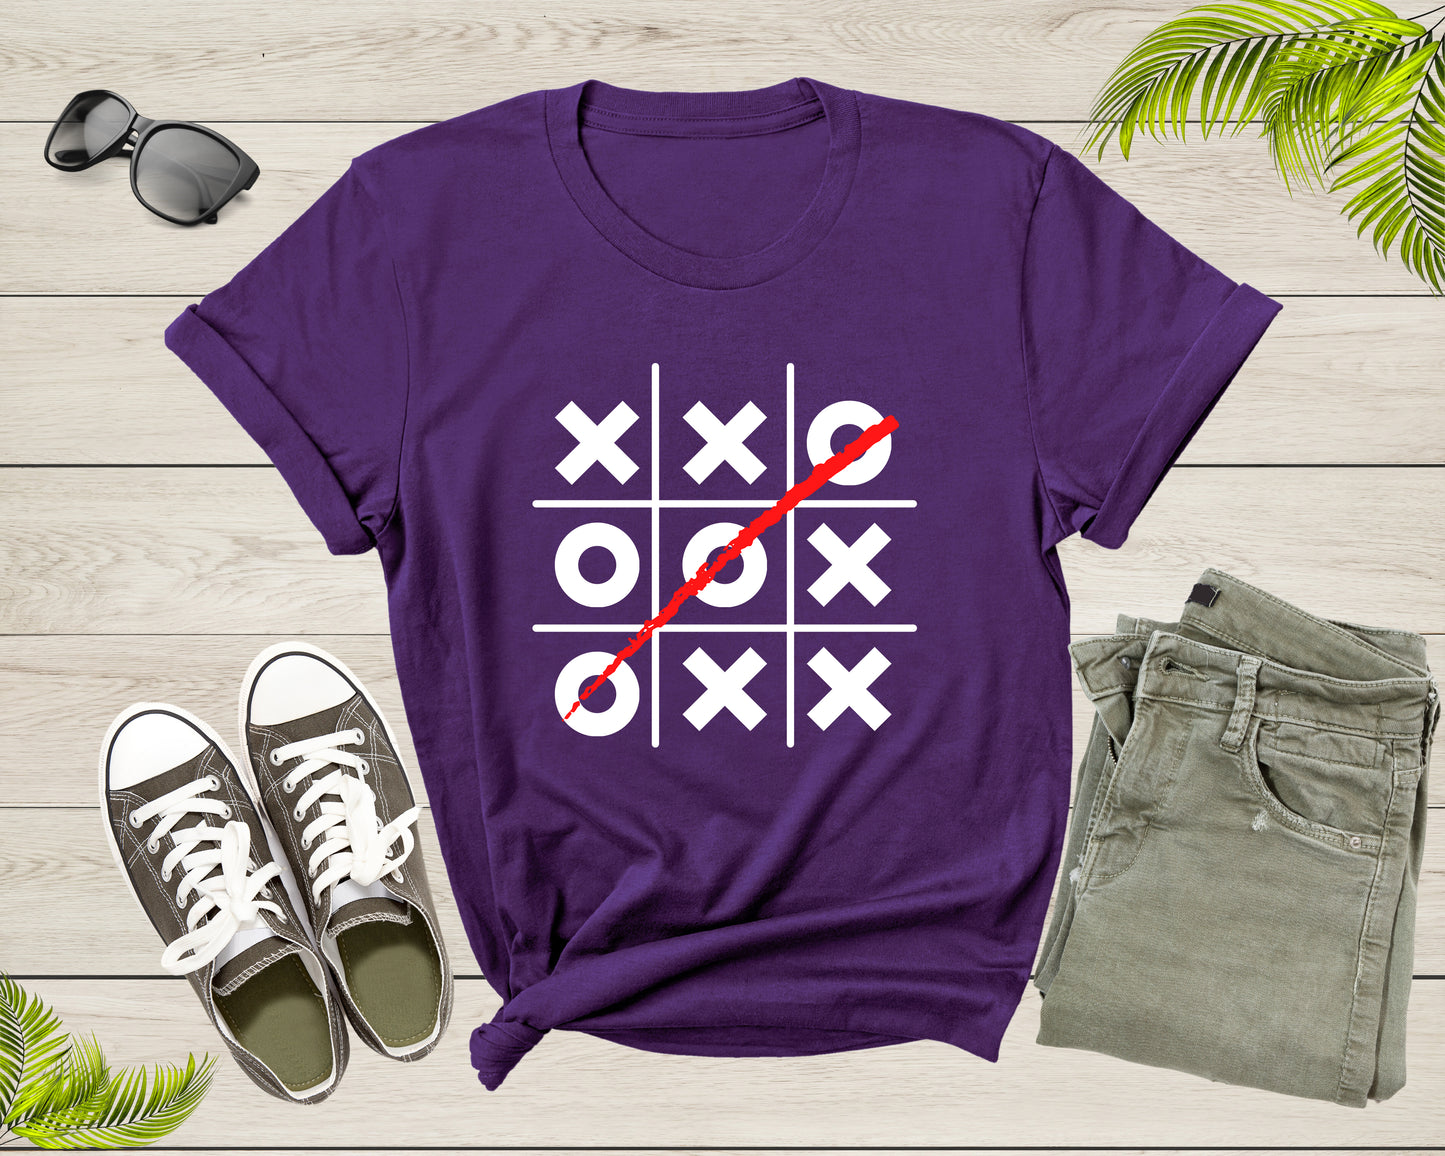 Tic Tac Toe Game Three in Row Traditional Kids Puzzle Game T-Shirt Cool Game Lover Gift T Shirt for Men Women Kids Boys Girls Teens Tshirt